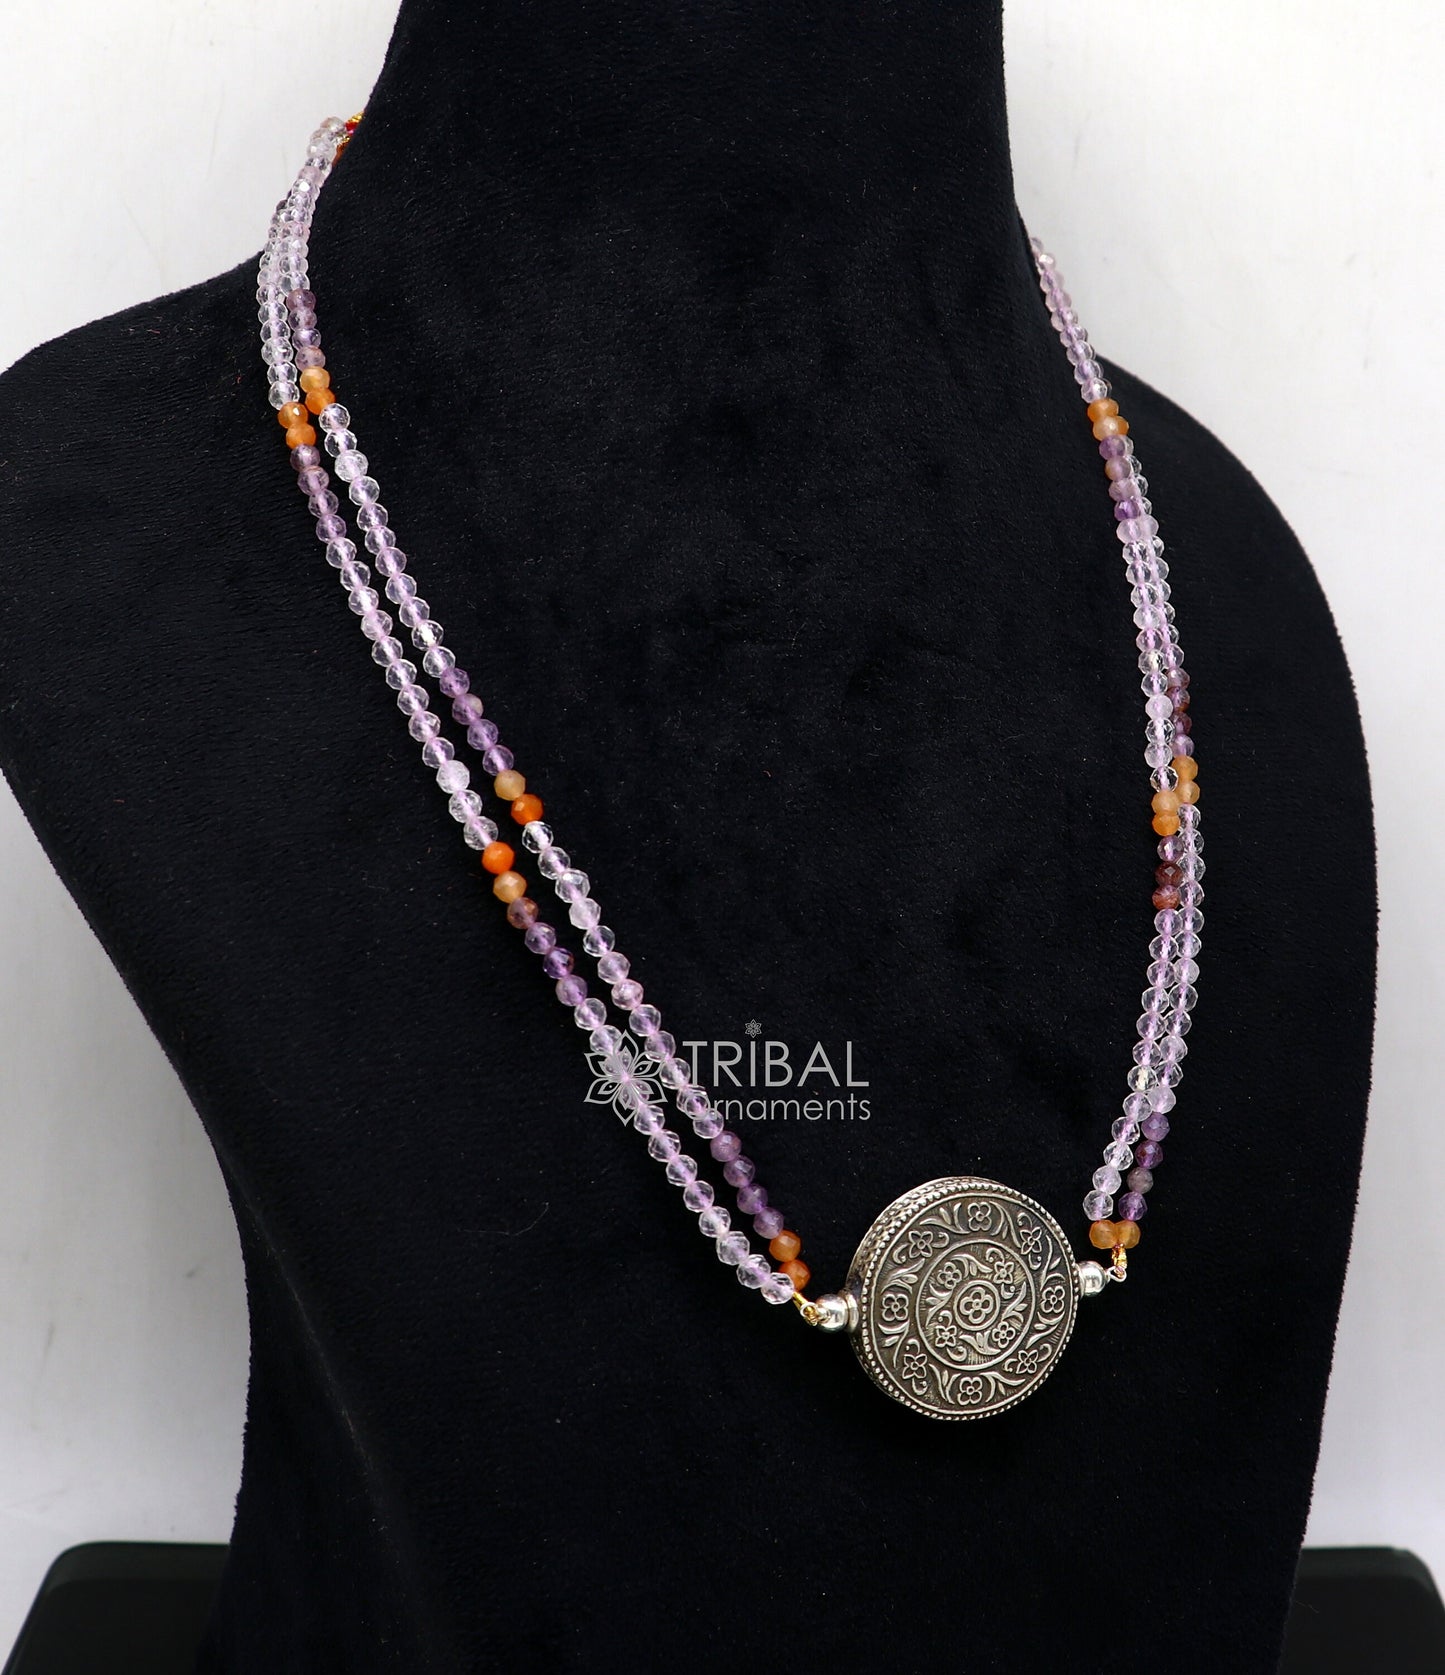 Indian traditional cultural style trendy natural multicolor stone beaded 925 sterling silver necklace, choker tribal ethnic jewelry set611 - TRIBAL ORNAMENTS